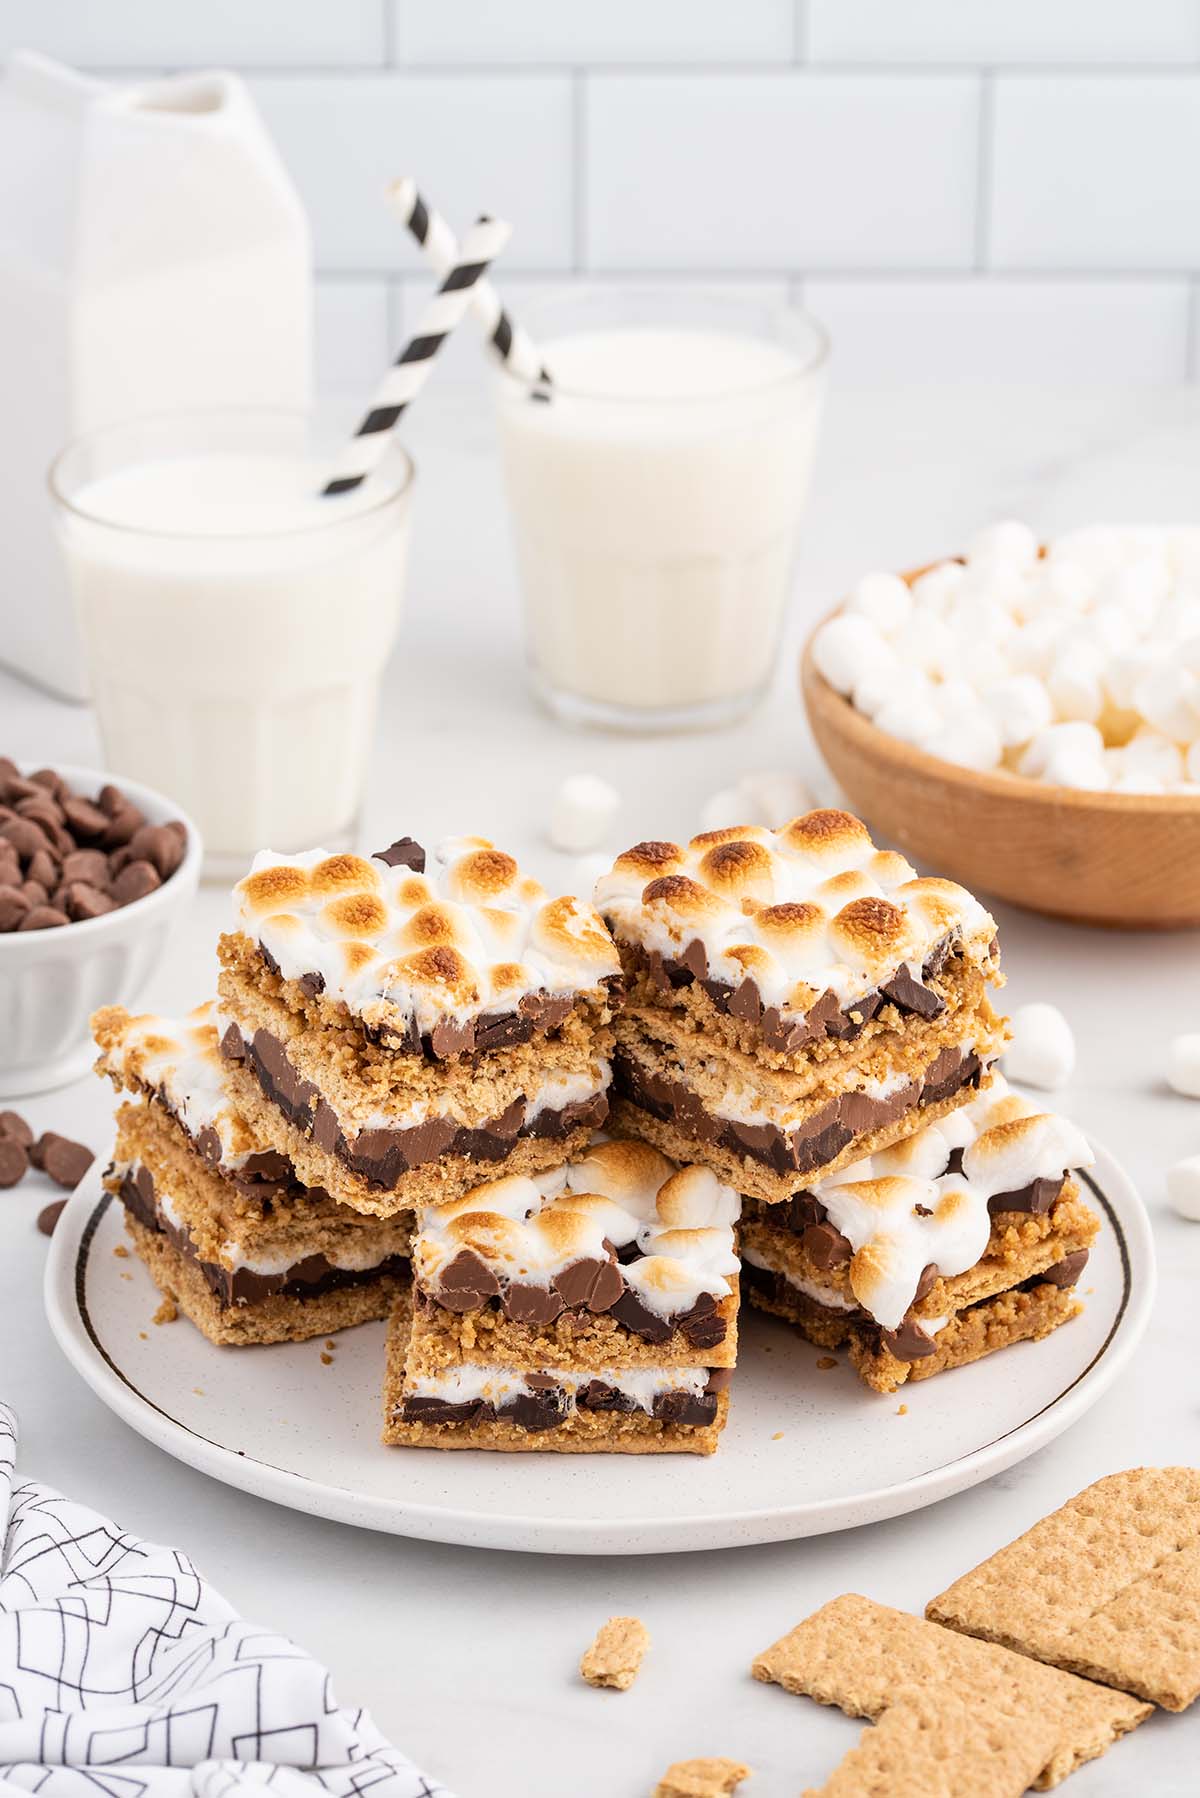 Baked S'mores stacked up on a plate